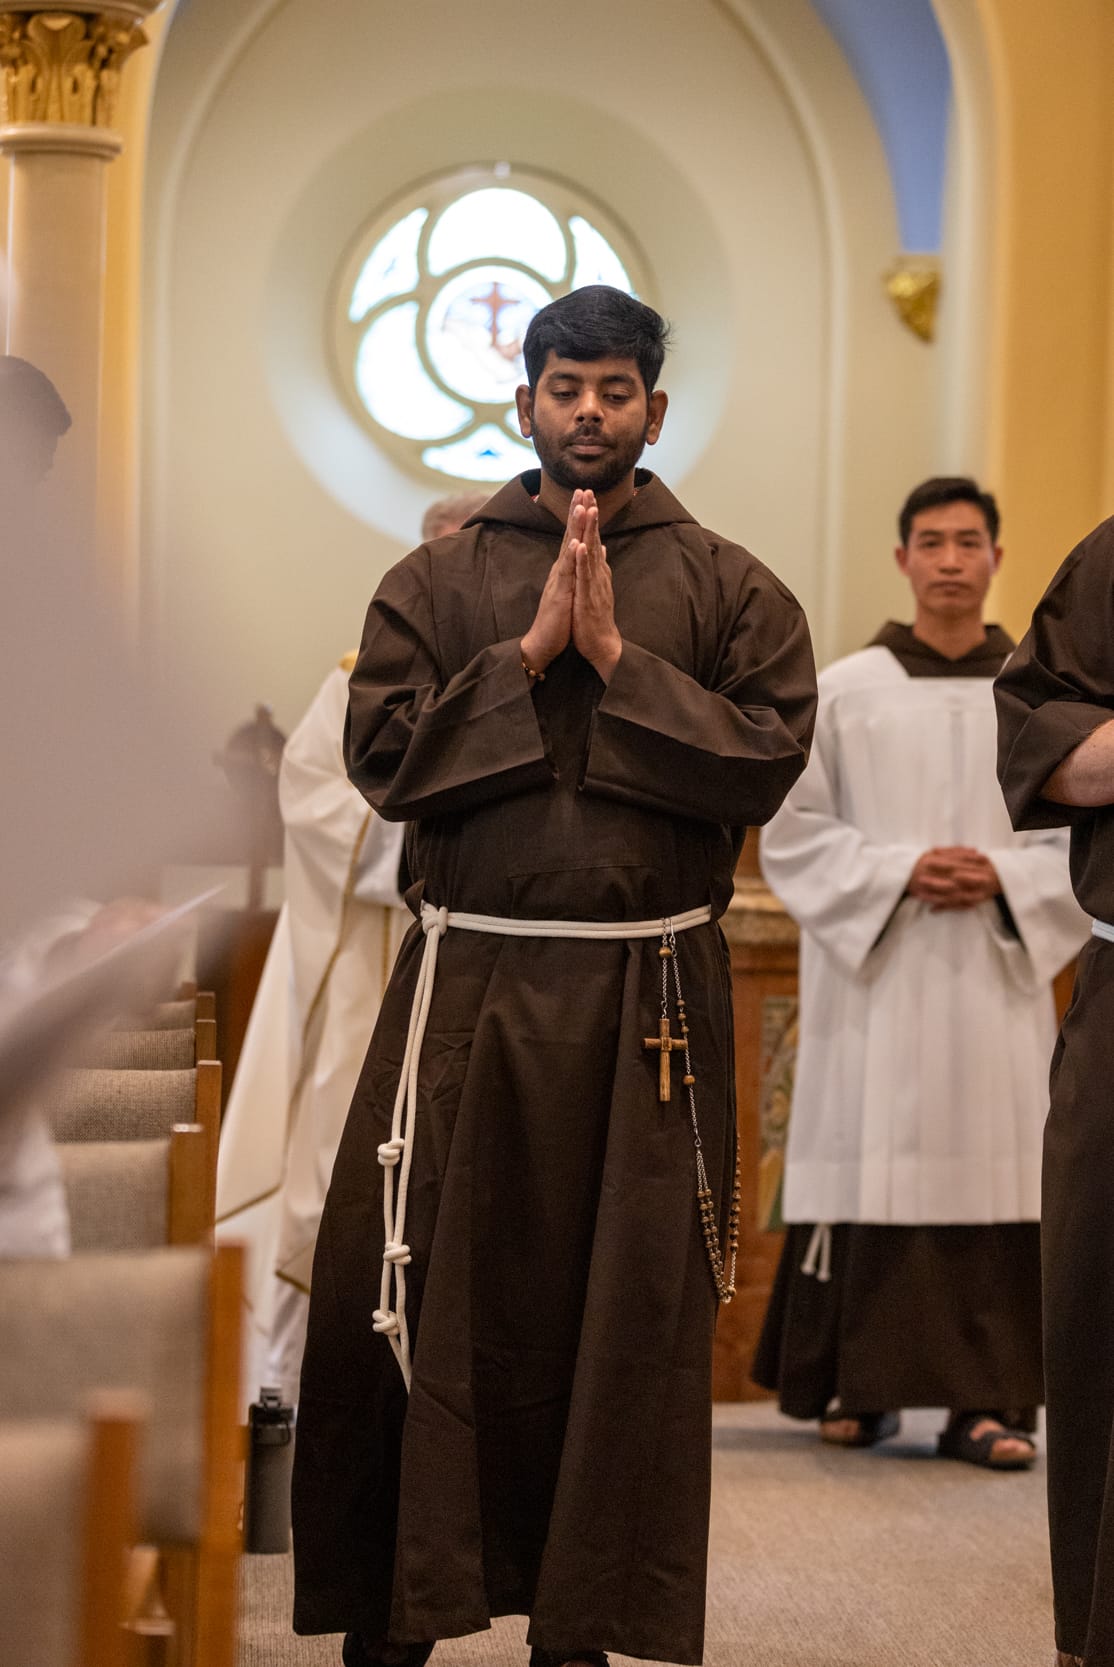 Br. Layola processes into the Chapel at his profession.